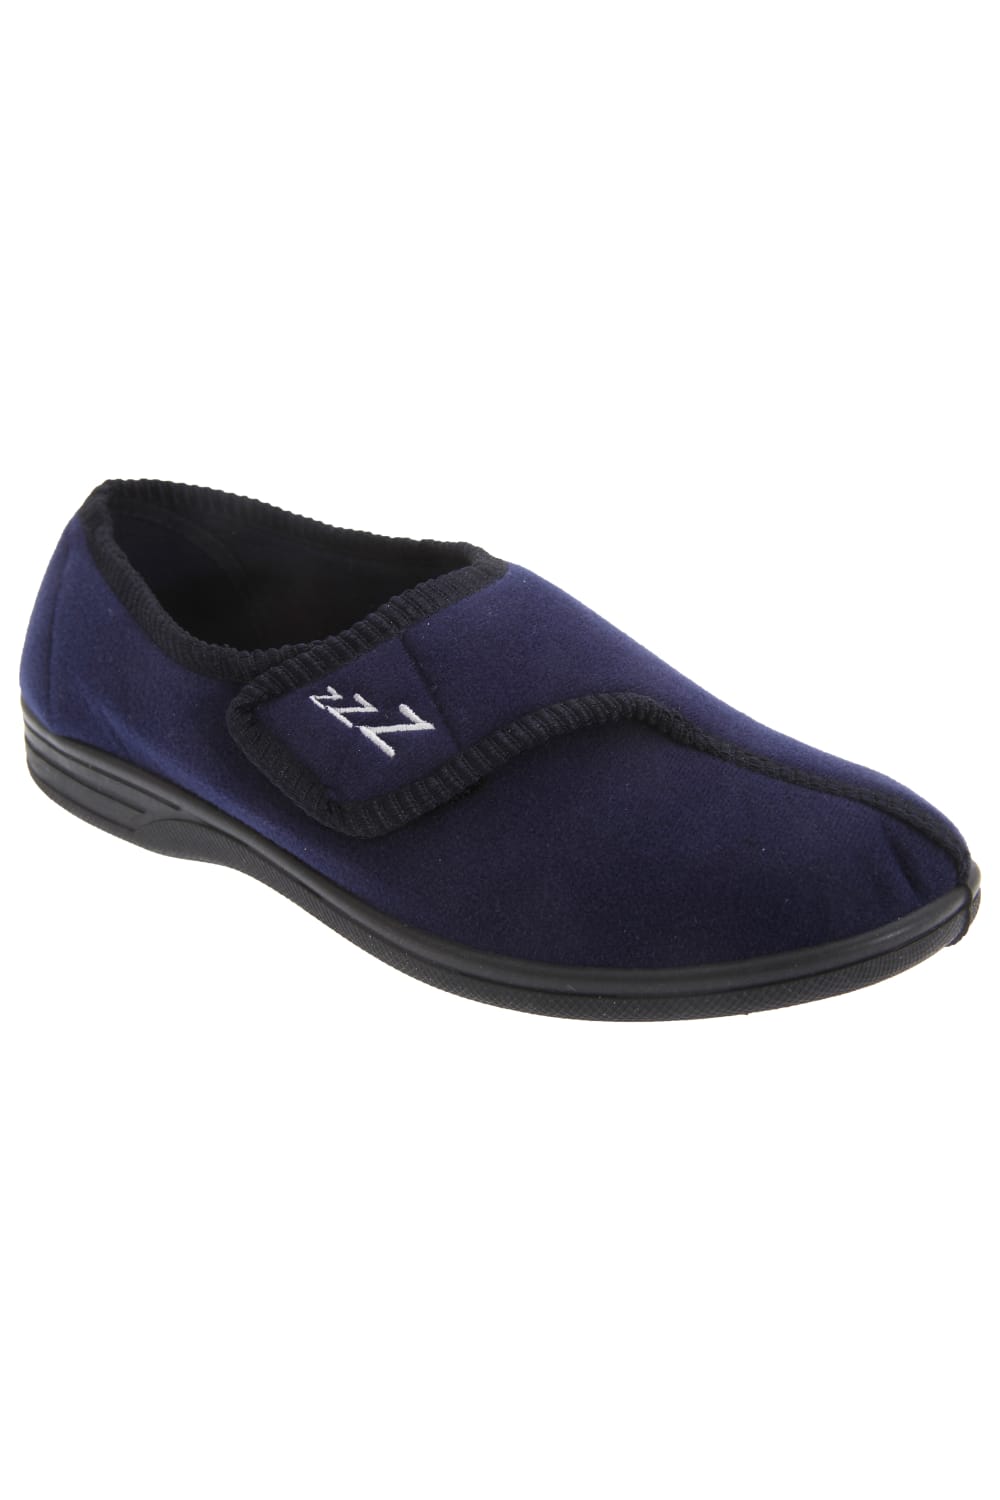 Mens Connor Touch Fastening Velour Slippers - Navy Blue